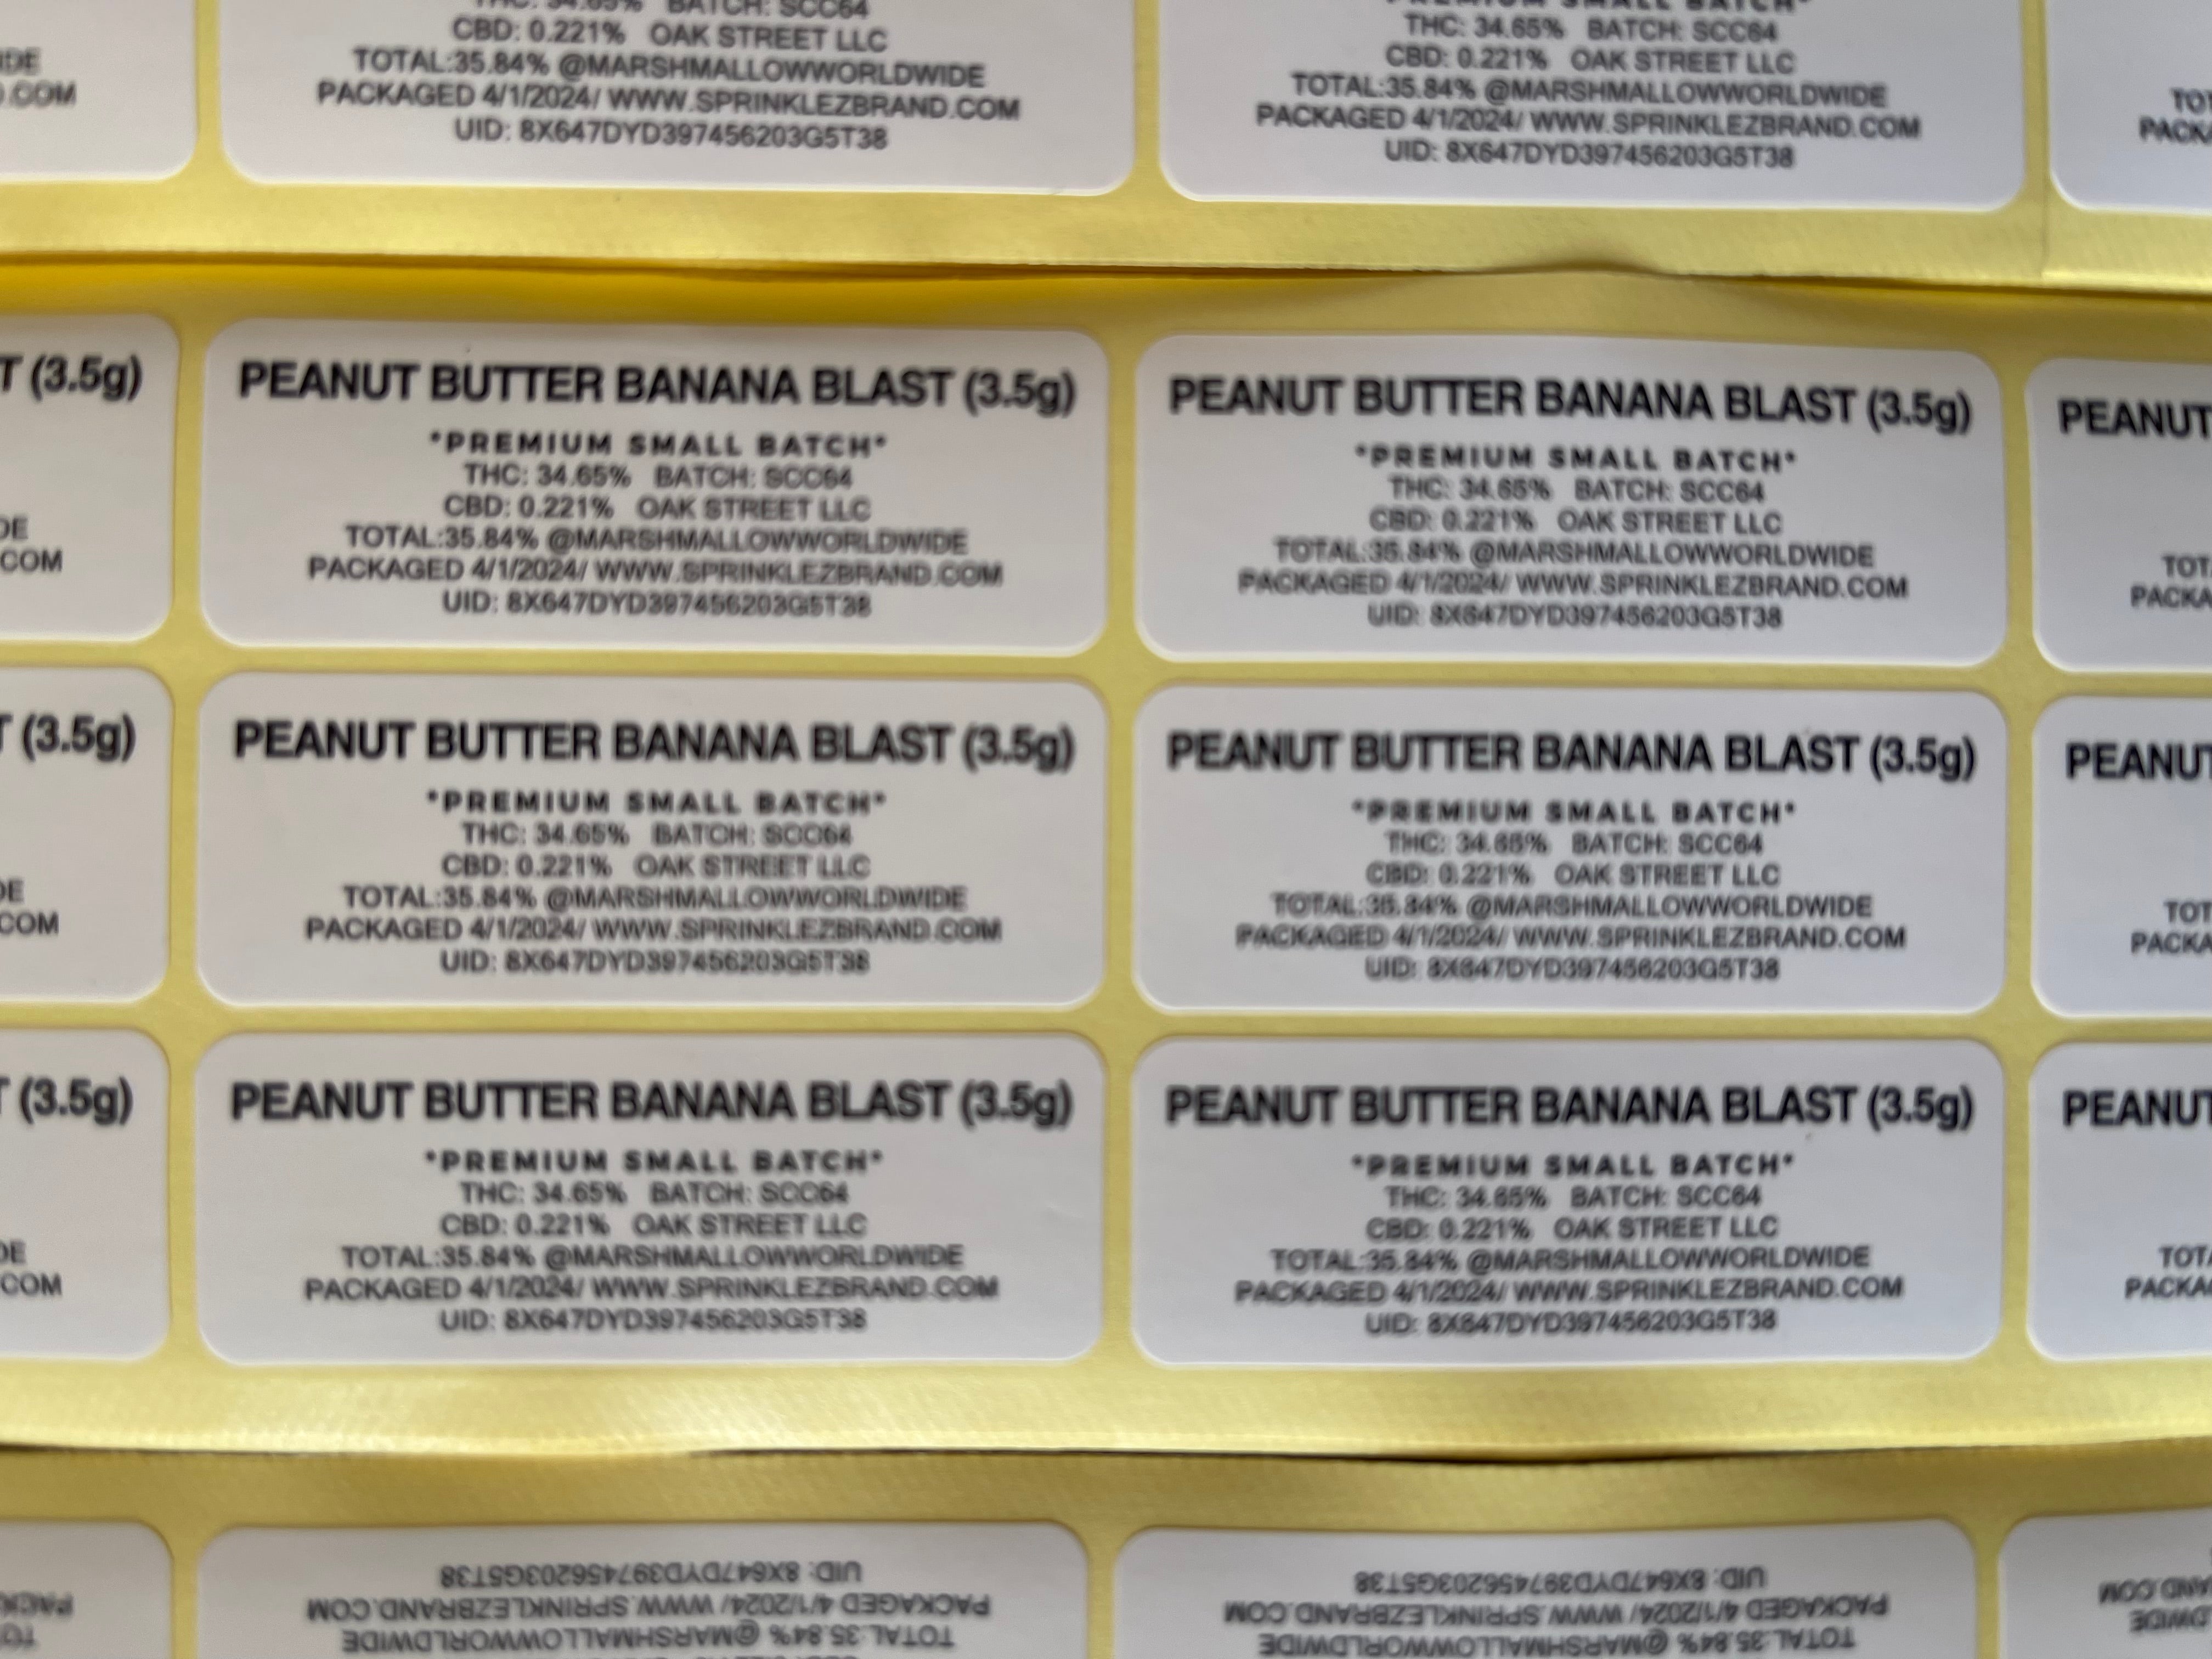 Sprinklez Peanut Butter Banana Blast 3.5g Mylar Bags -With stickers and label